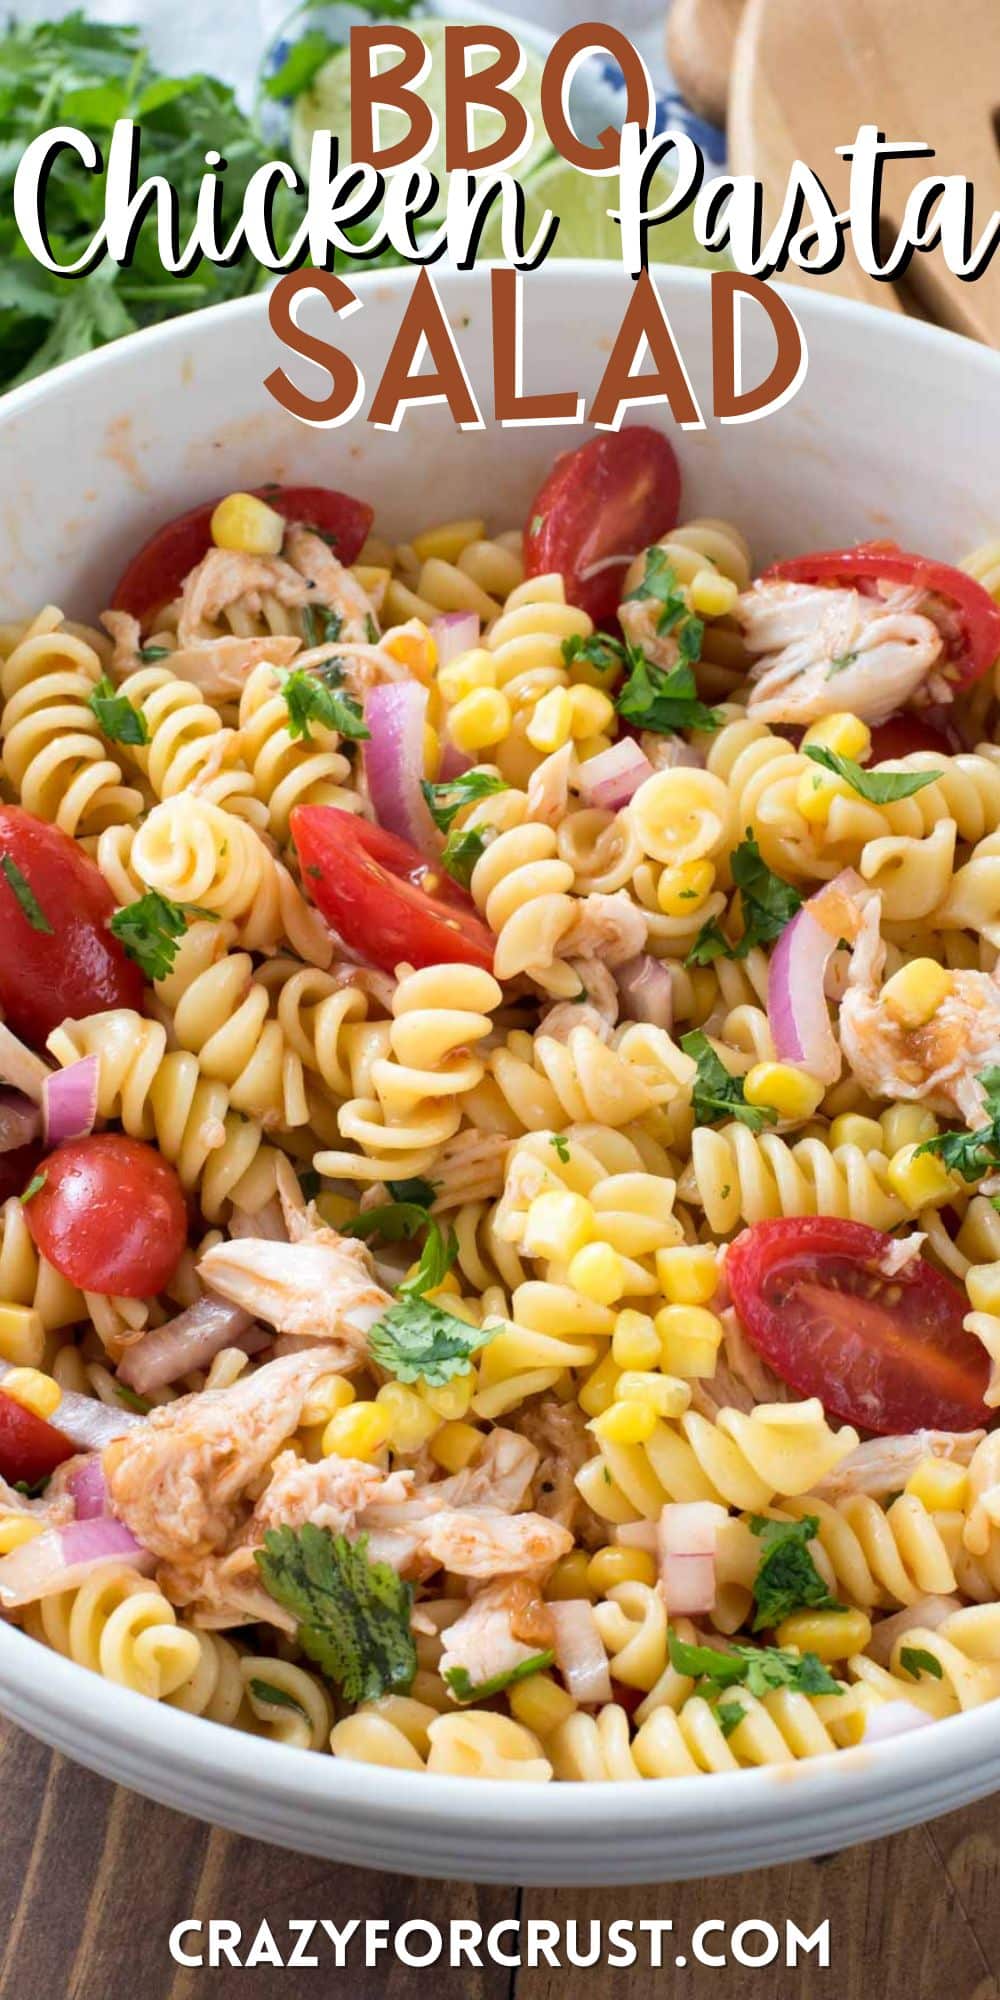 tomatoes and pasta and chicken mixed together with words on the image.